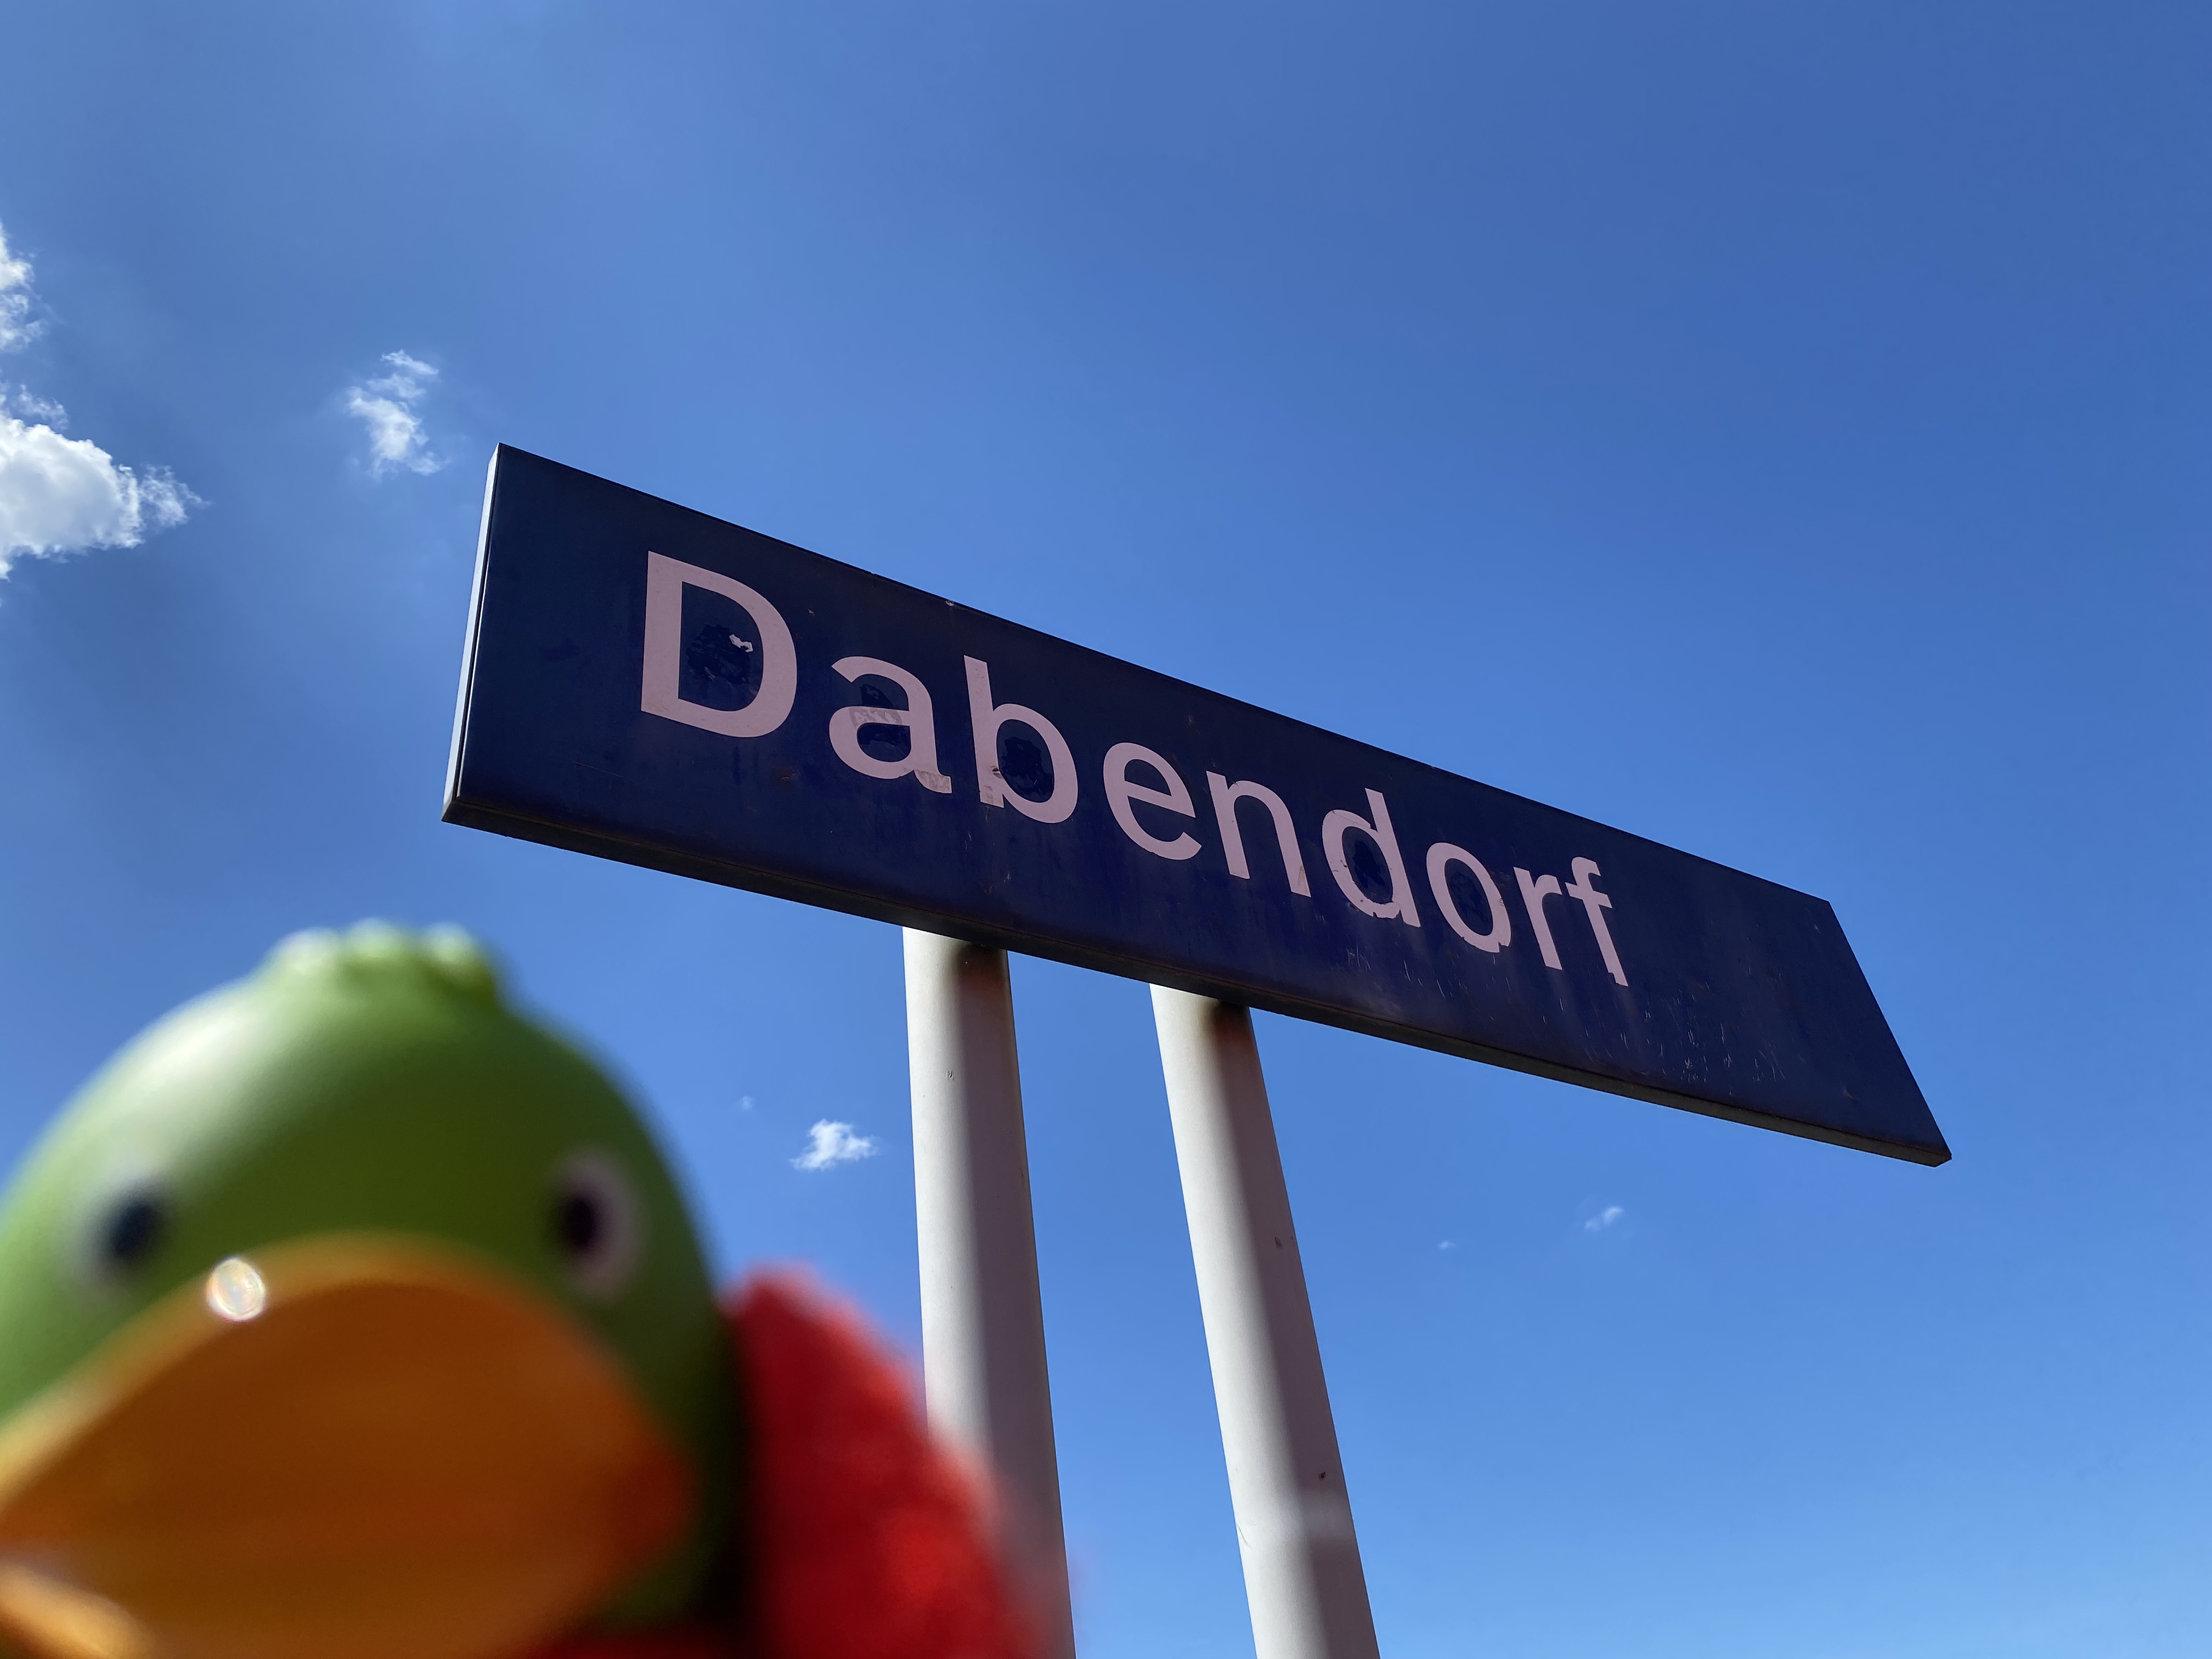 Guillaume in the metropolis of Dabendorf